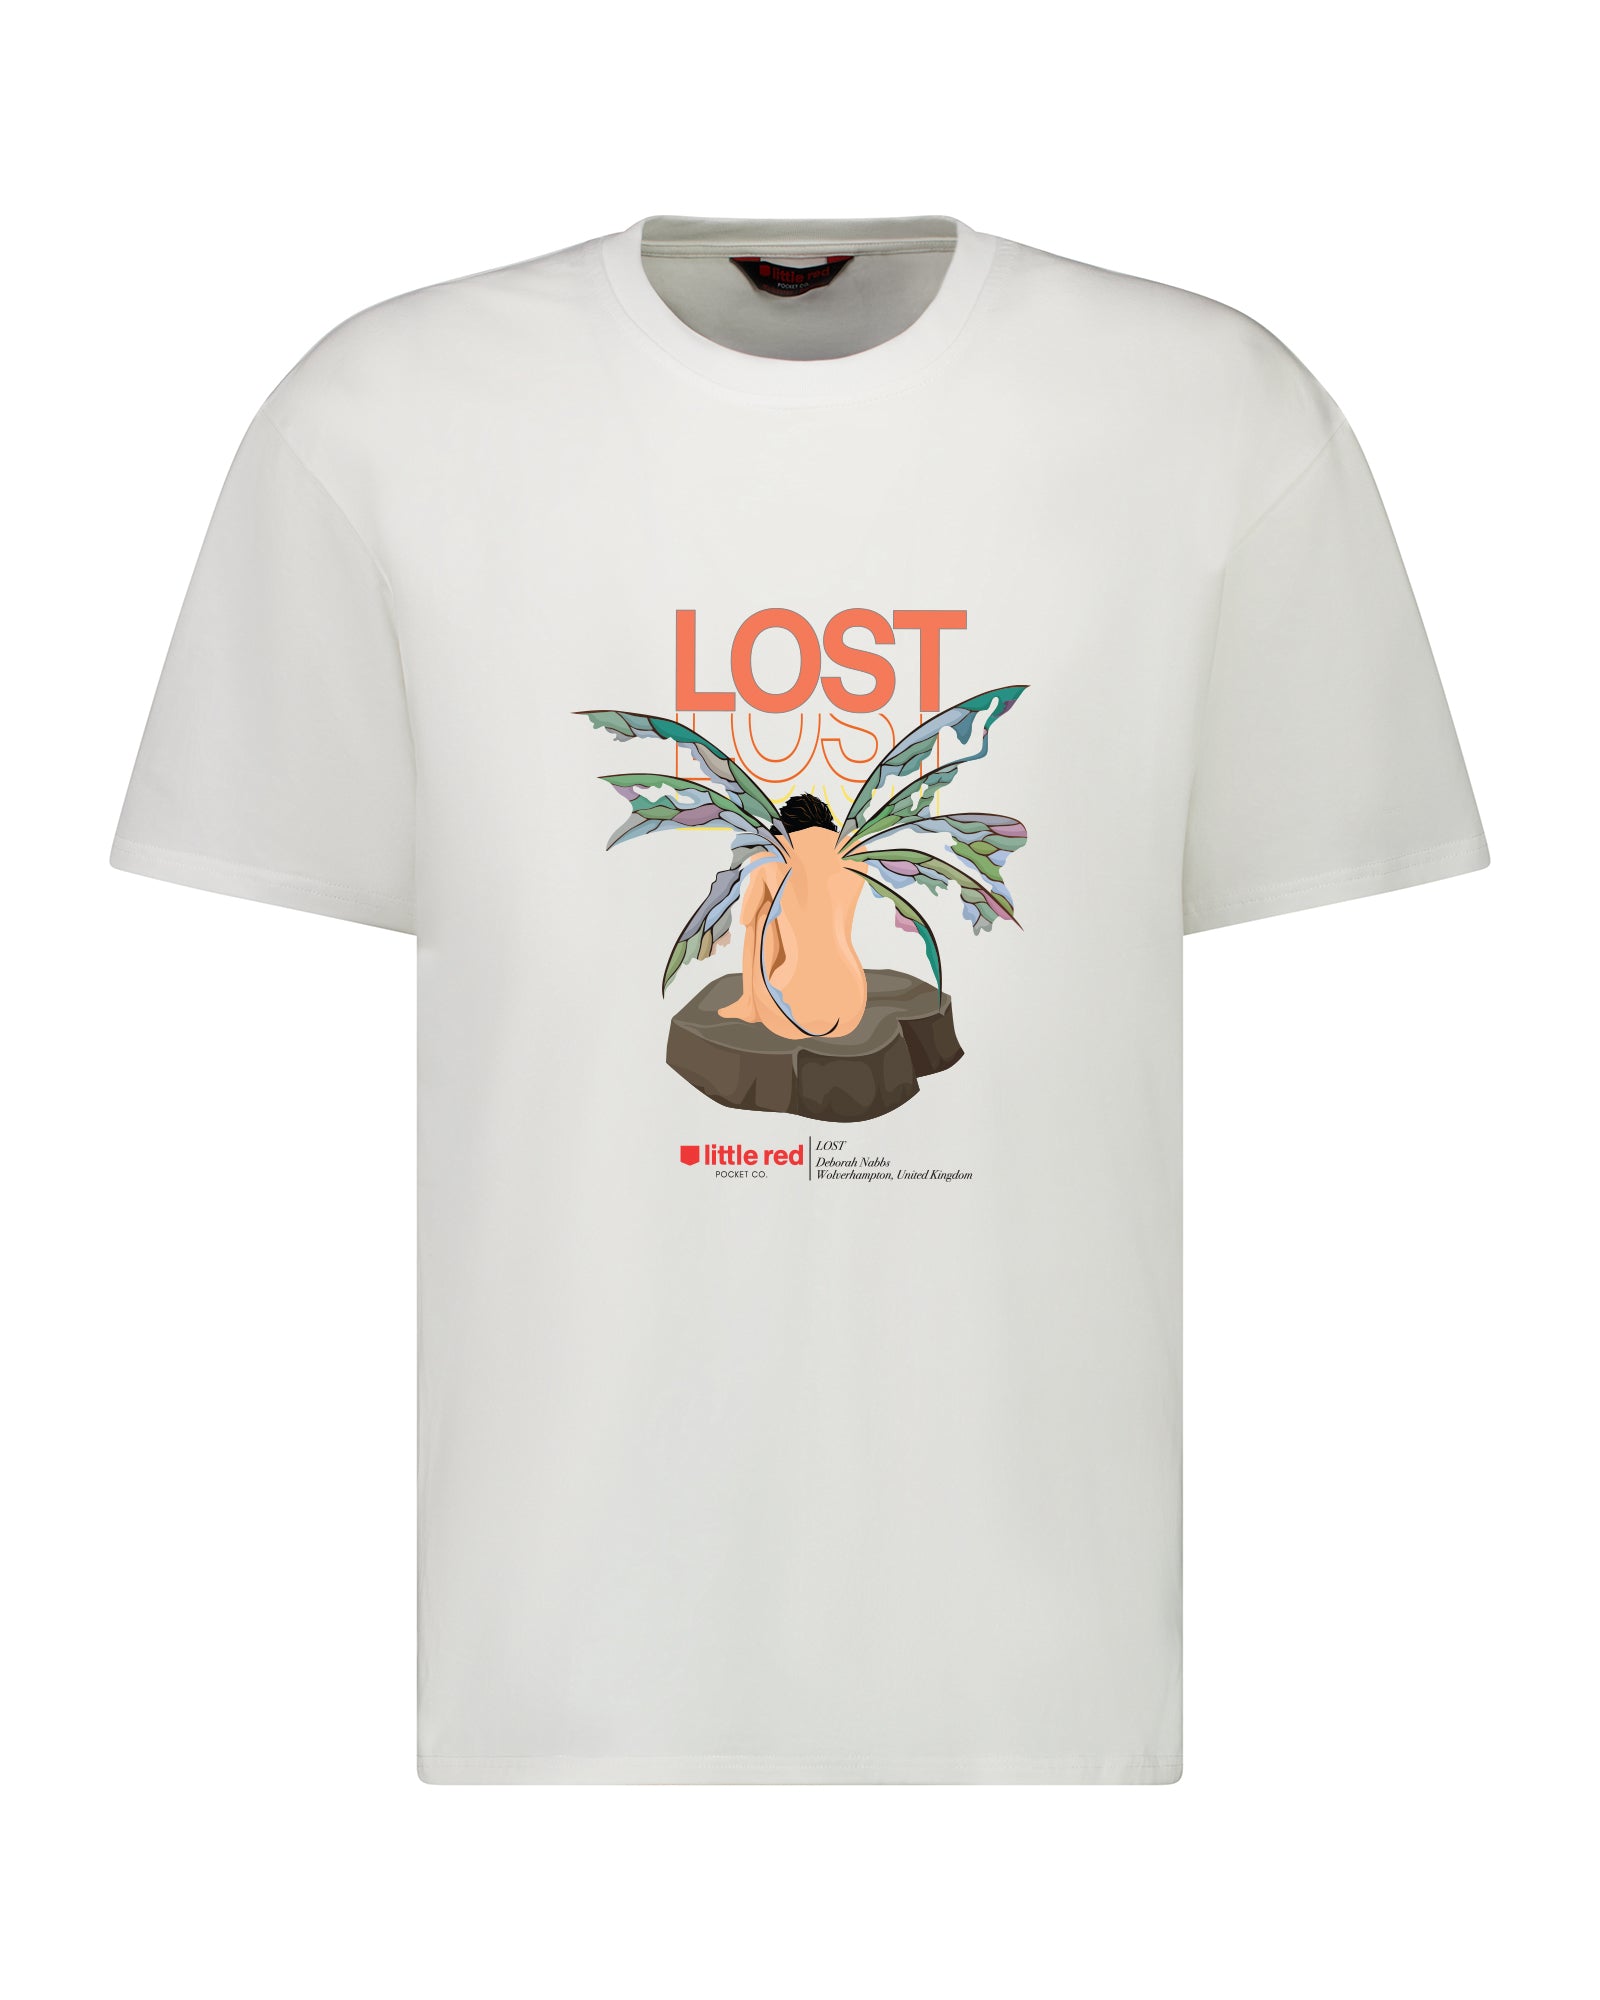 "Lost" Male Tee